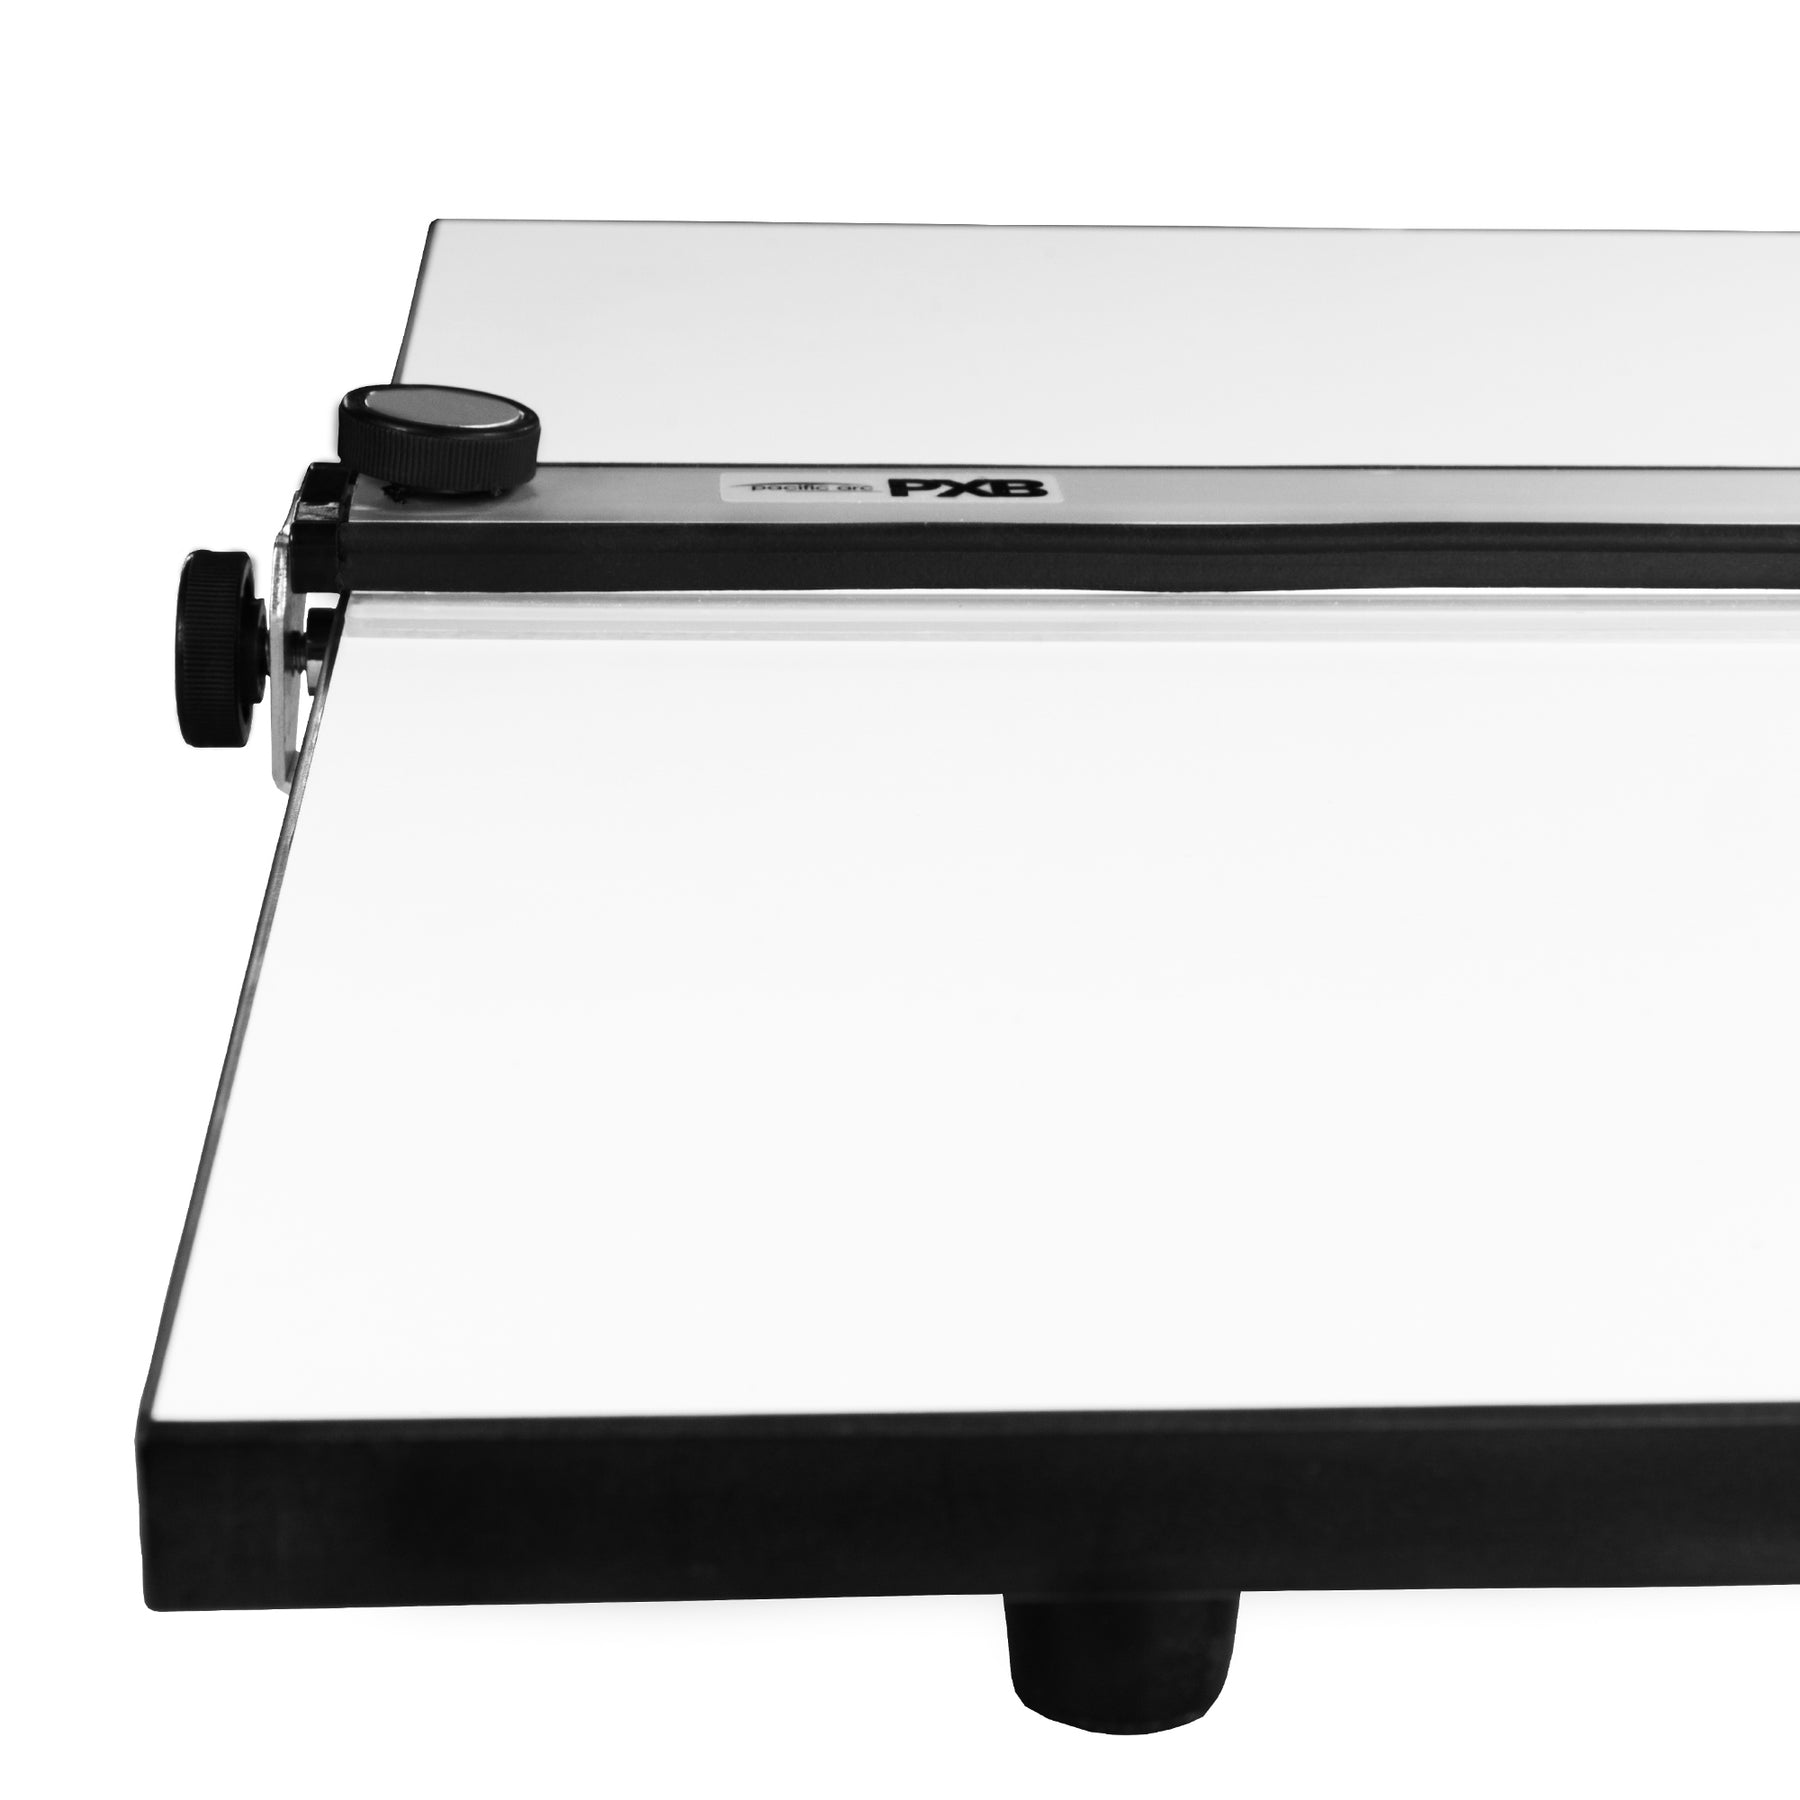 Acurit PXB Drawing Boards for Artists and Designers - Portable Workspace  for Drawing, Sketching, Drafting, Painting - Fixed Angled Laminated Surface  with Ruler and Parallel Motion Bar